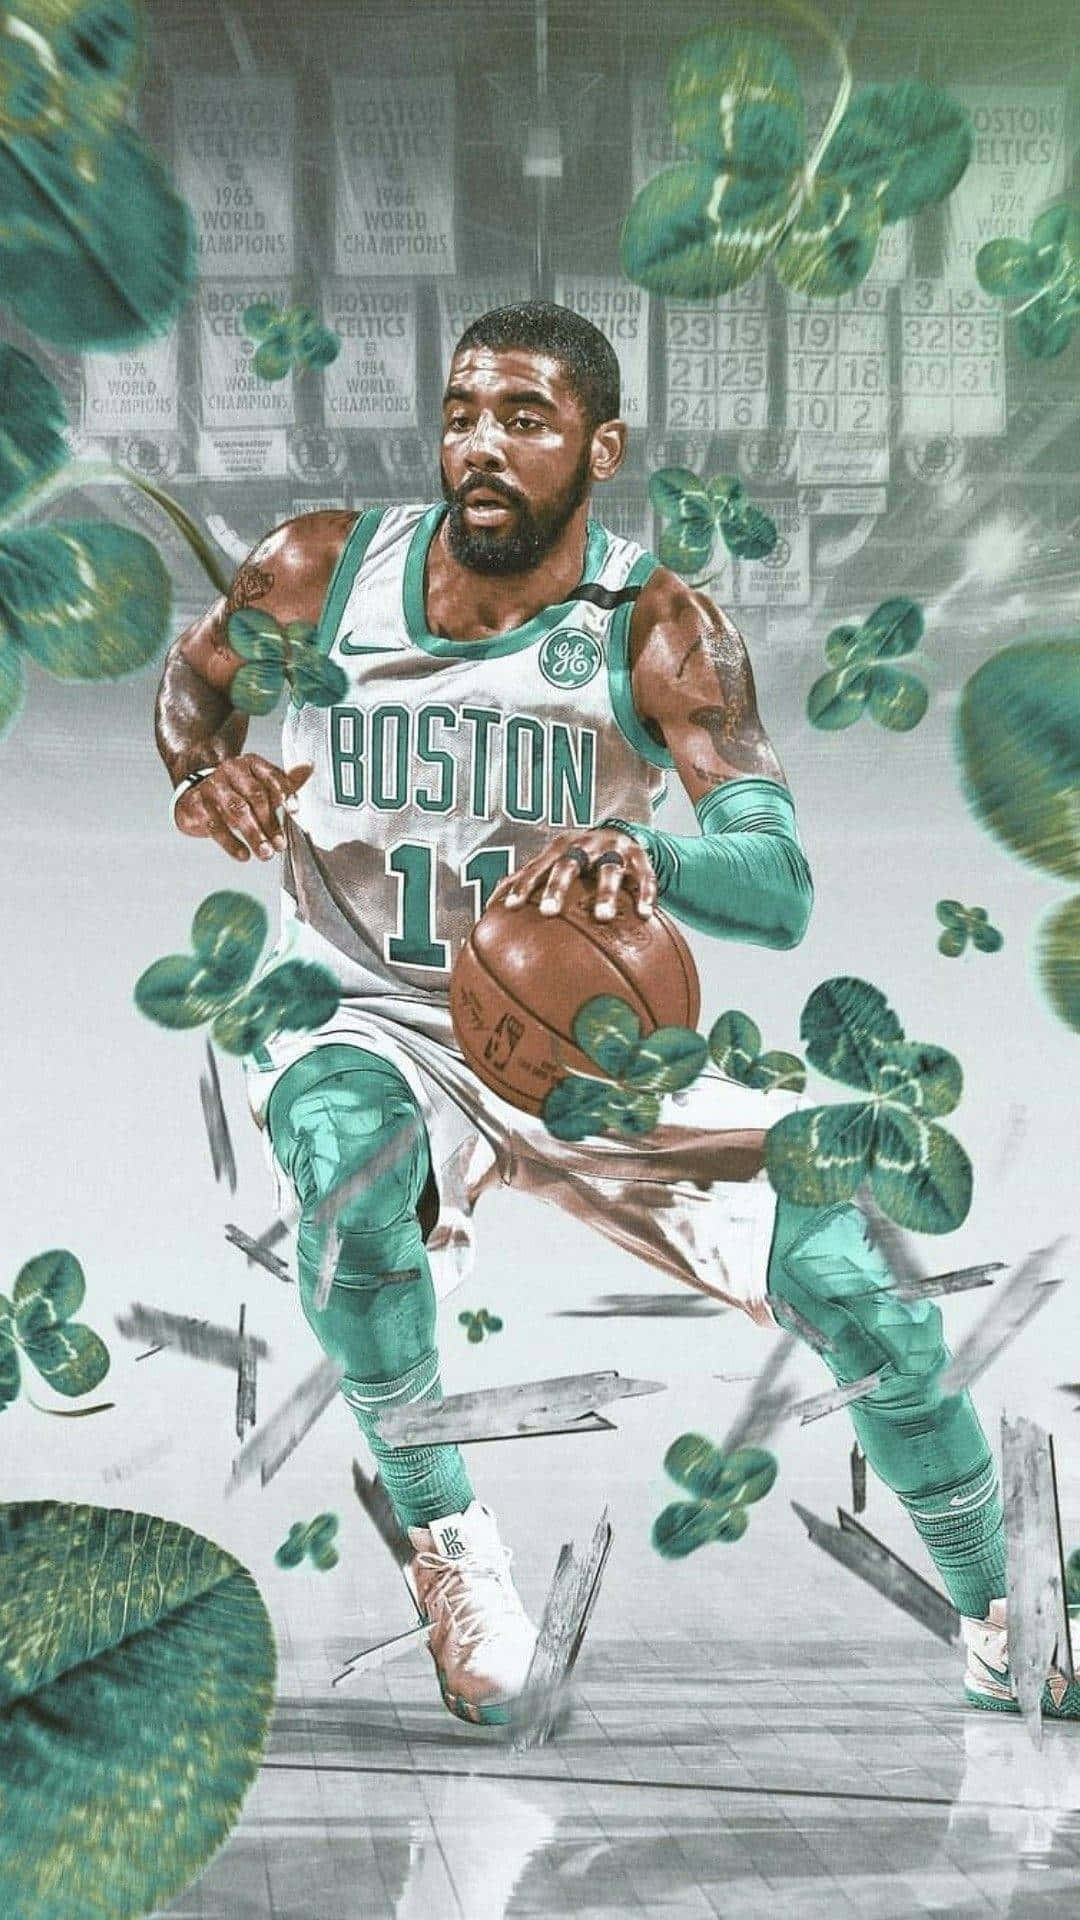 Kyrie Irving staying cool under pressure. Wallpaper